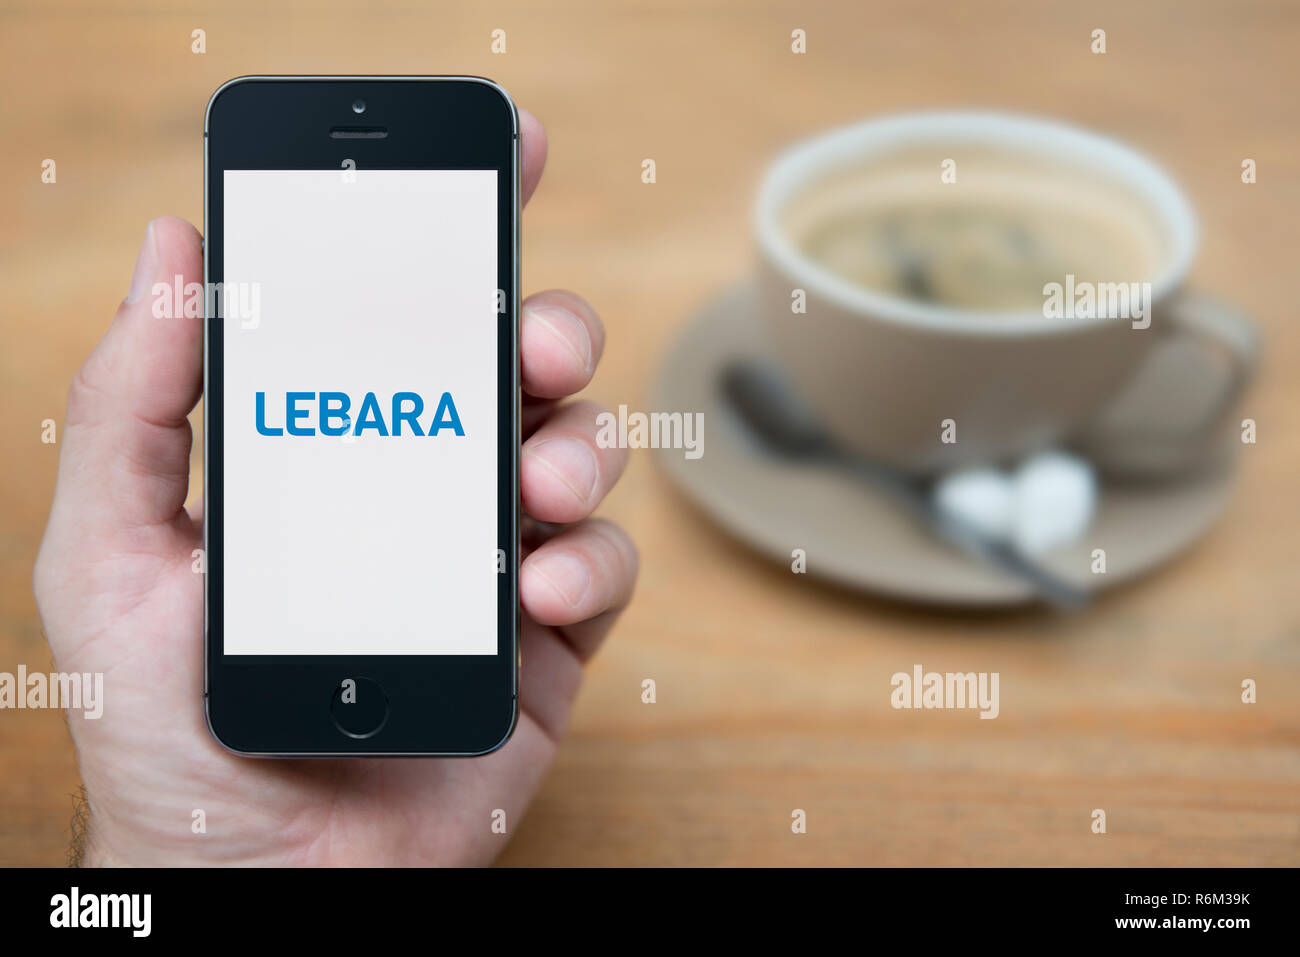 A man looks at his iPhone which displays the Lebara logo (Editorial use only). Stock Photo